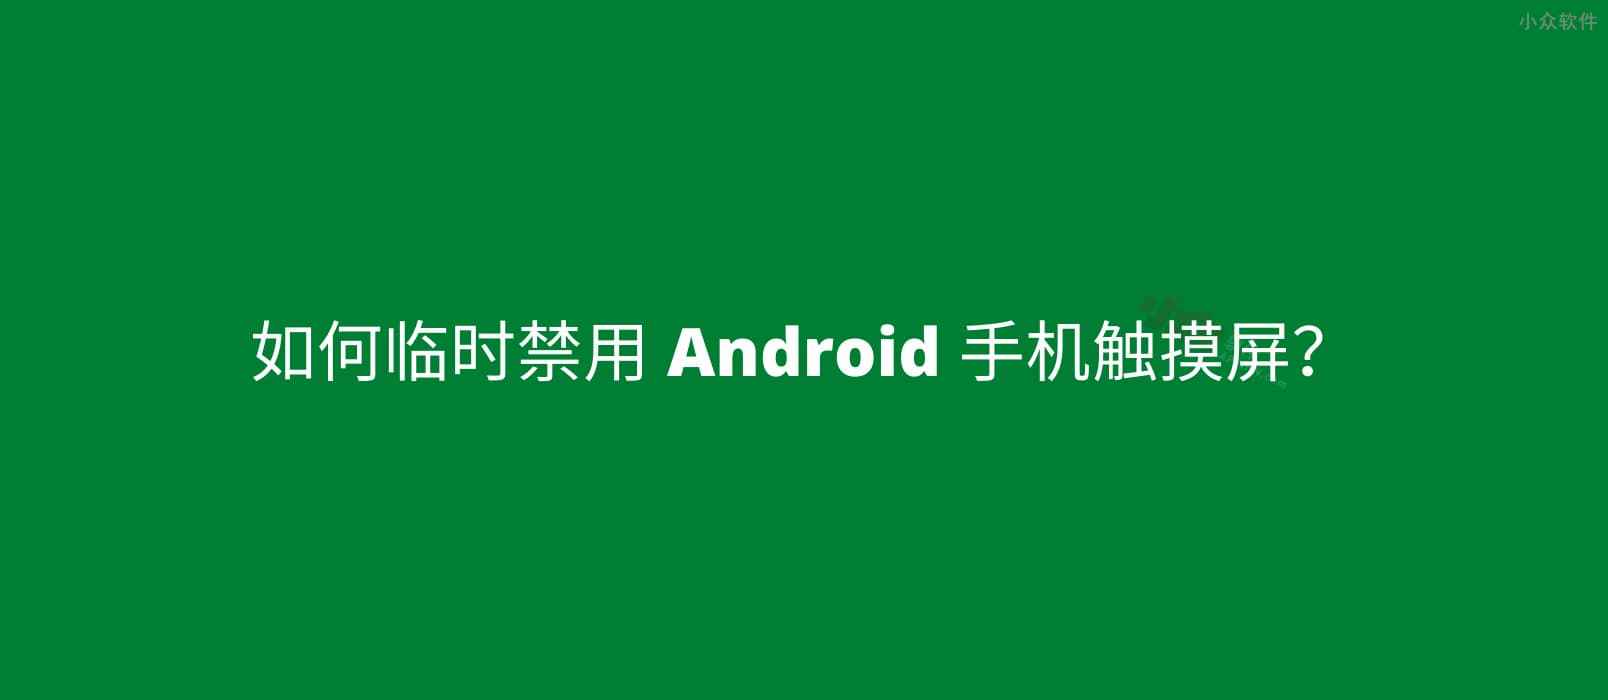 Touch Protector - 临时禁用 Android 手机触摸屏 1